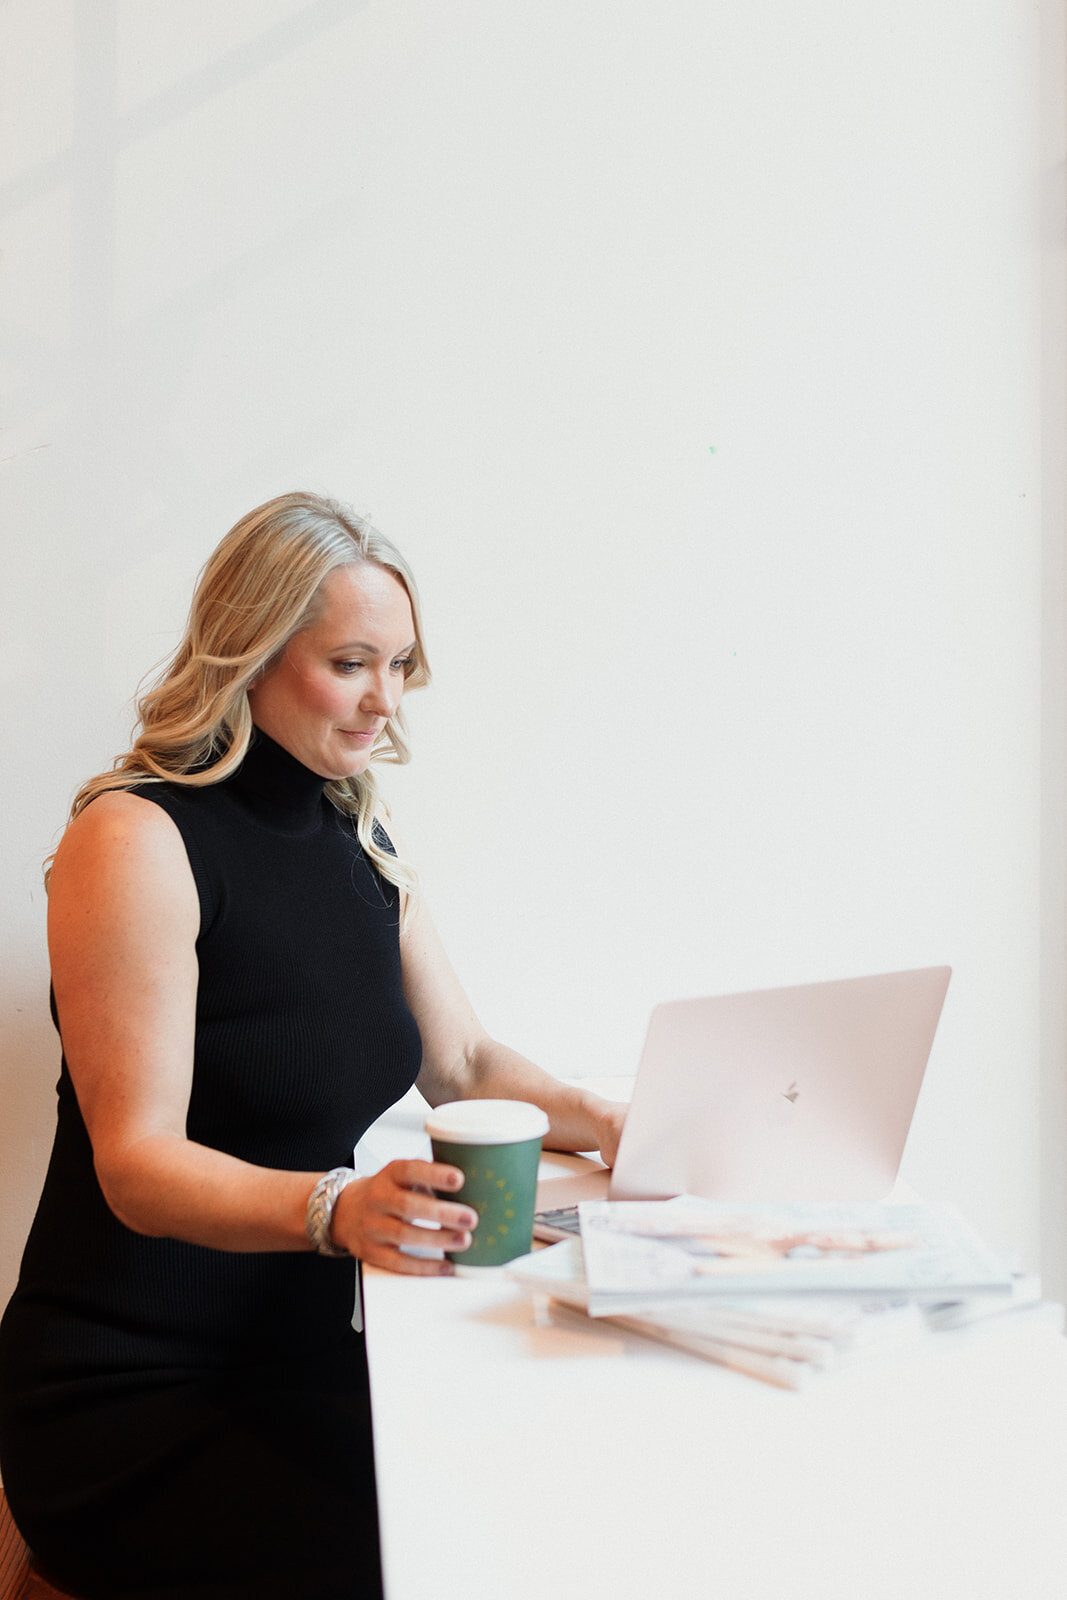 blonde woman sitting at a desk working on her laptop and drinking coffee. White background